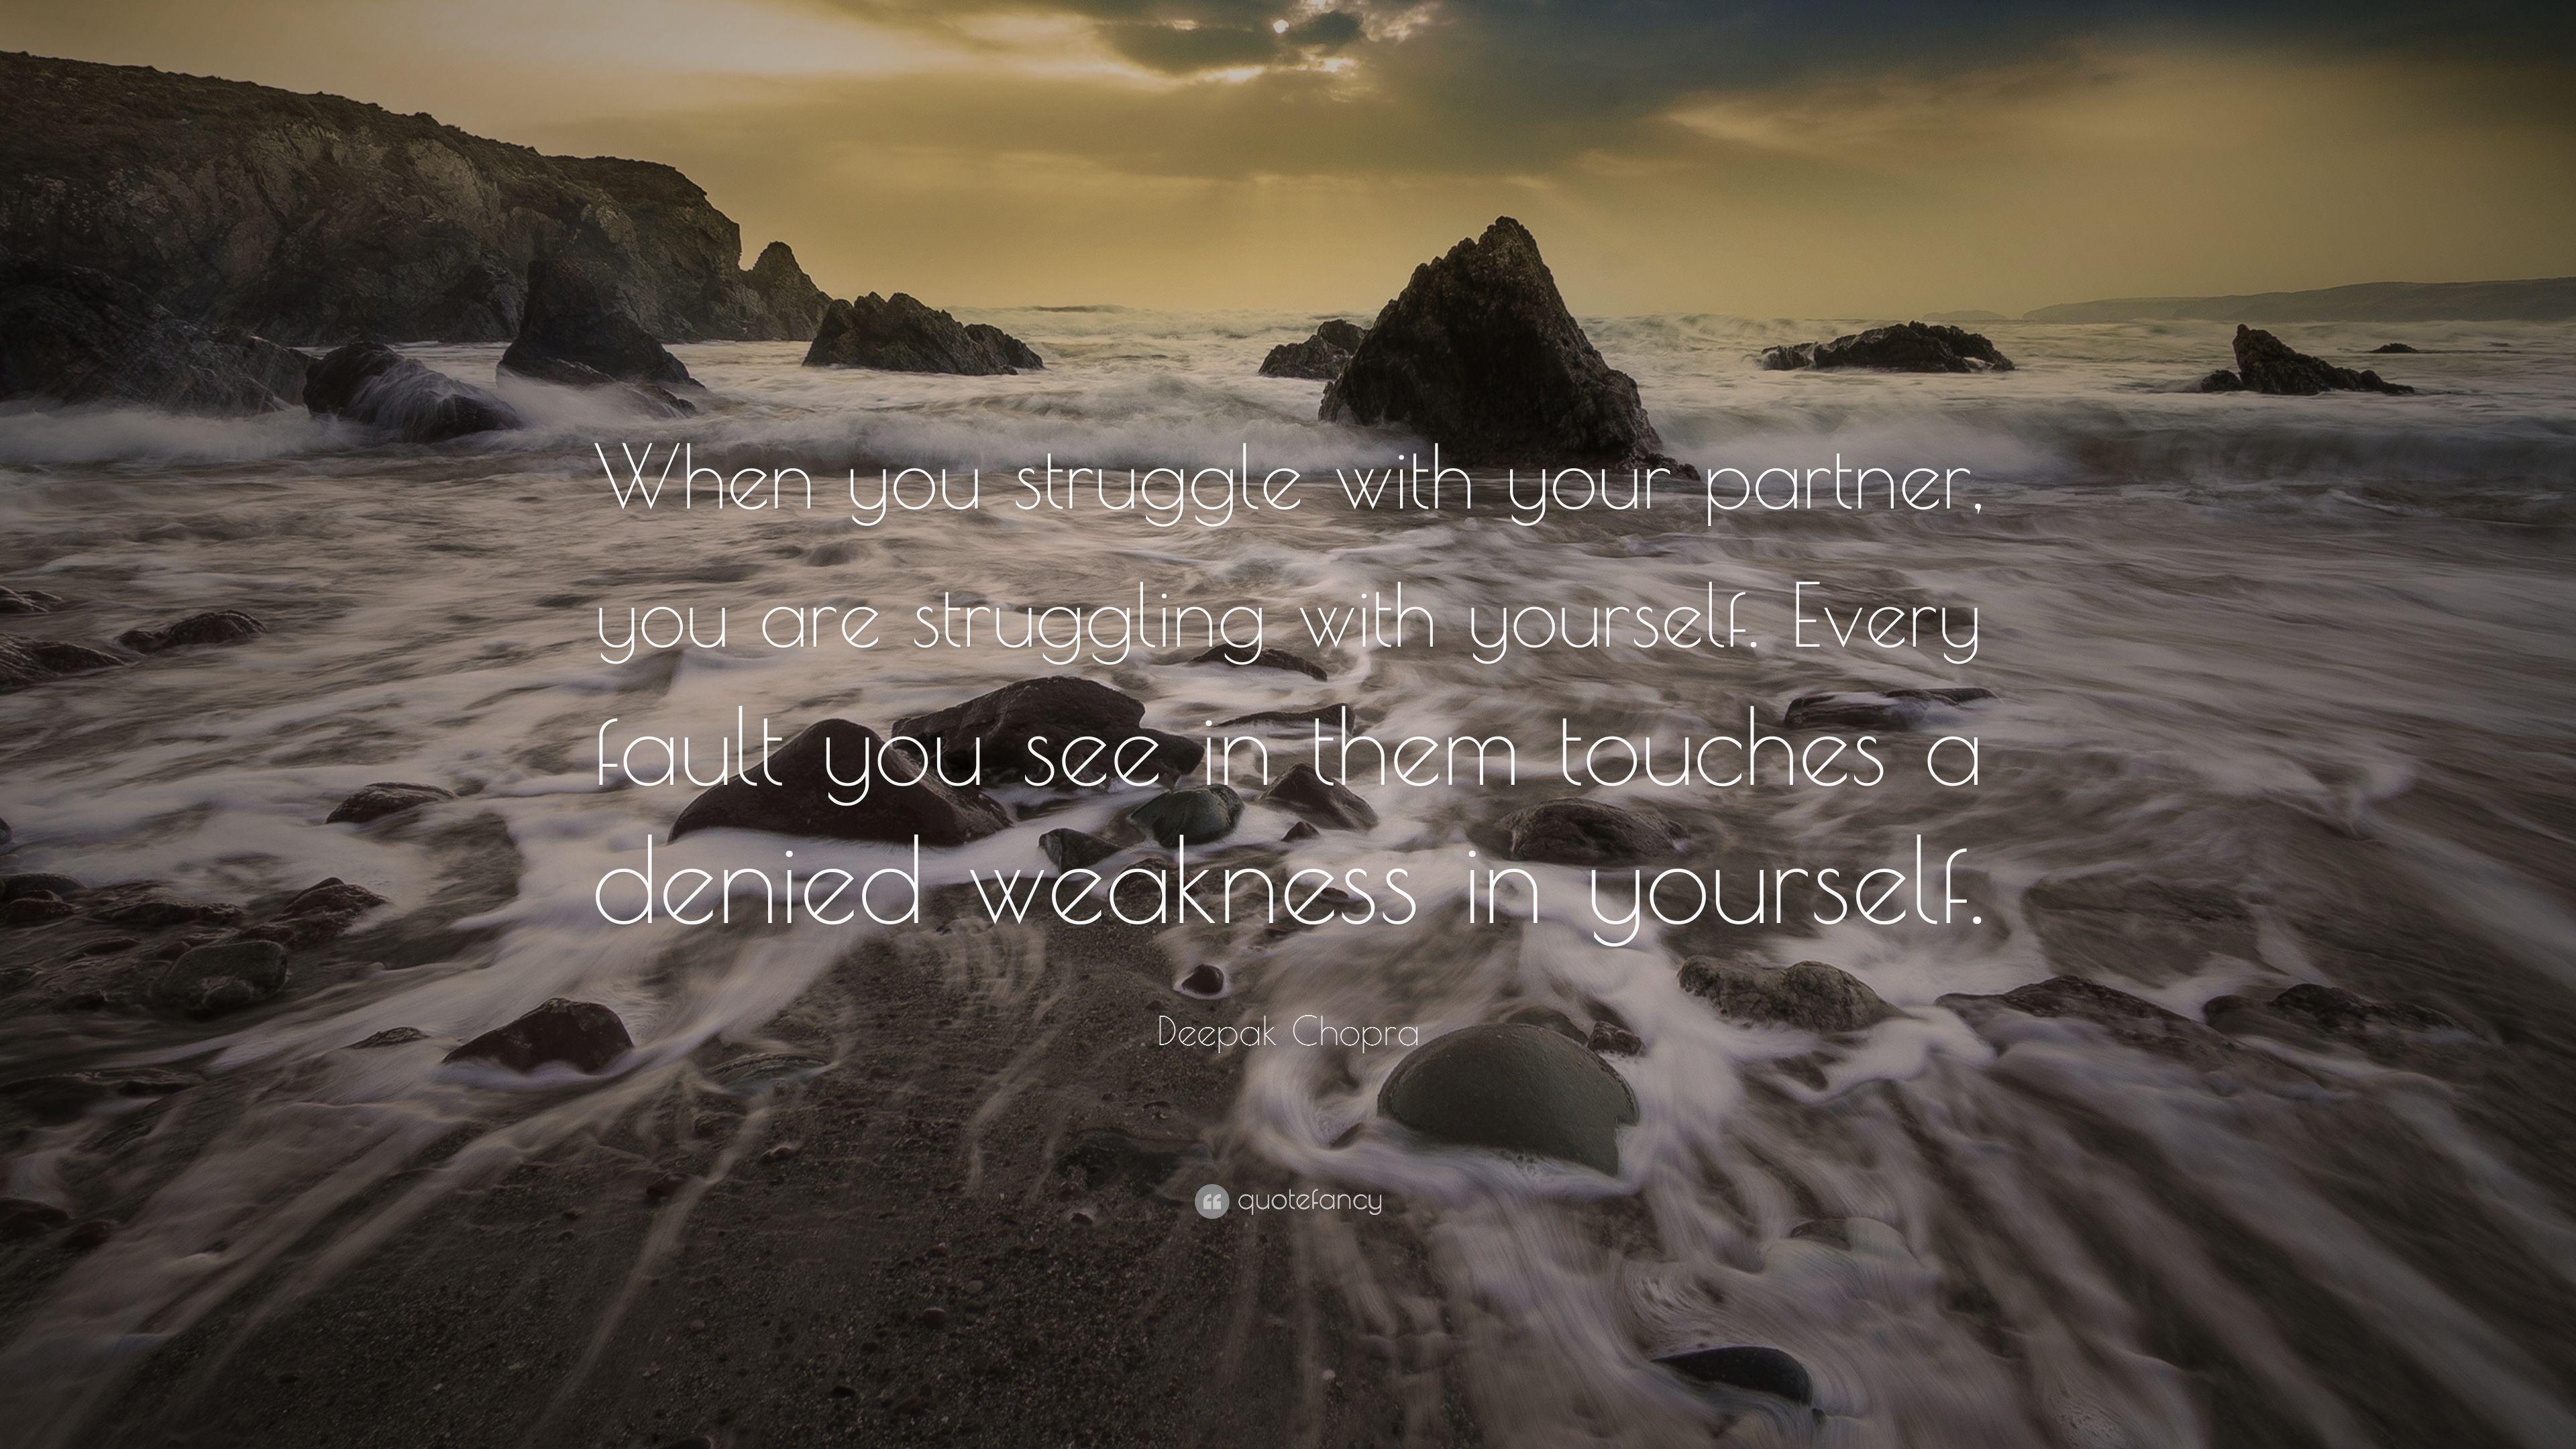 Deepak Chopra Quote: “When you struggle with your partner, you are